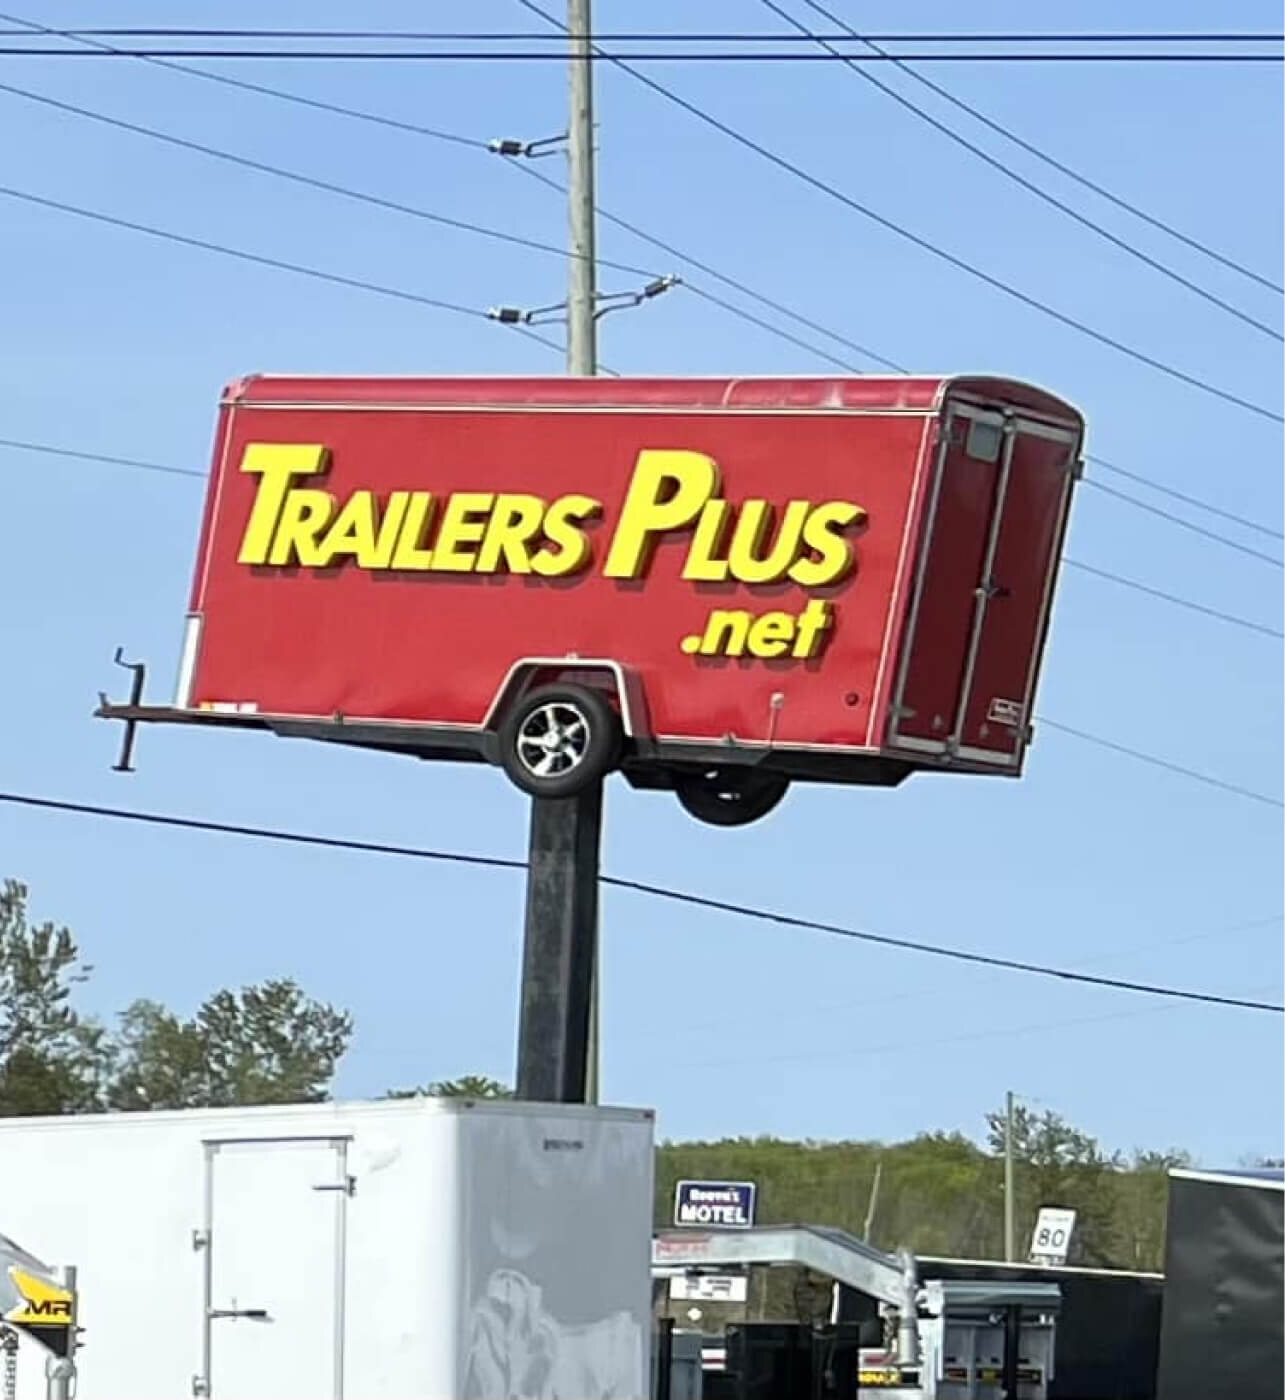 Welcome to Trailers Plus